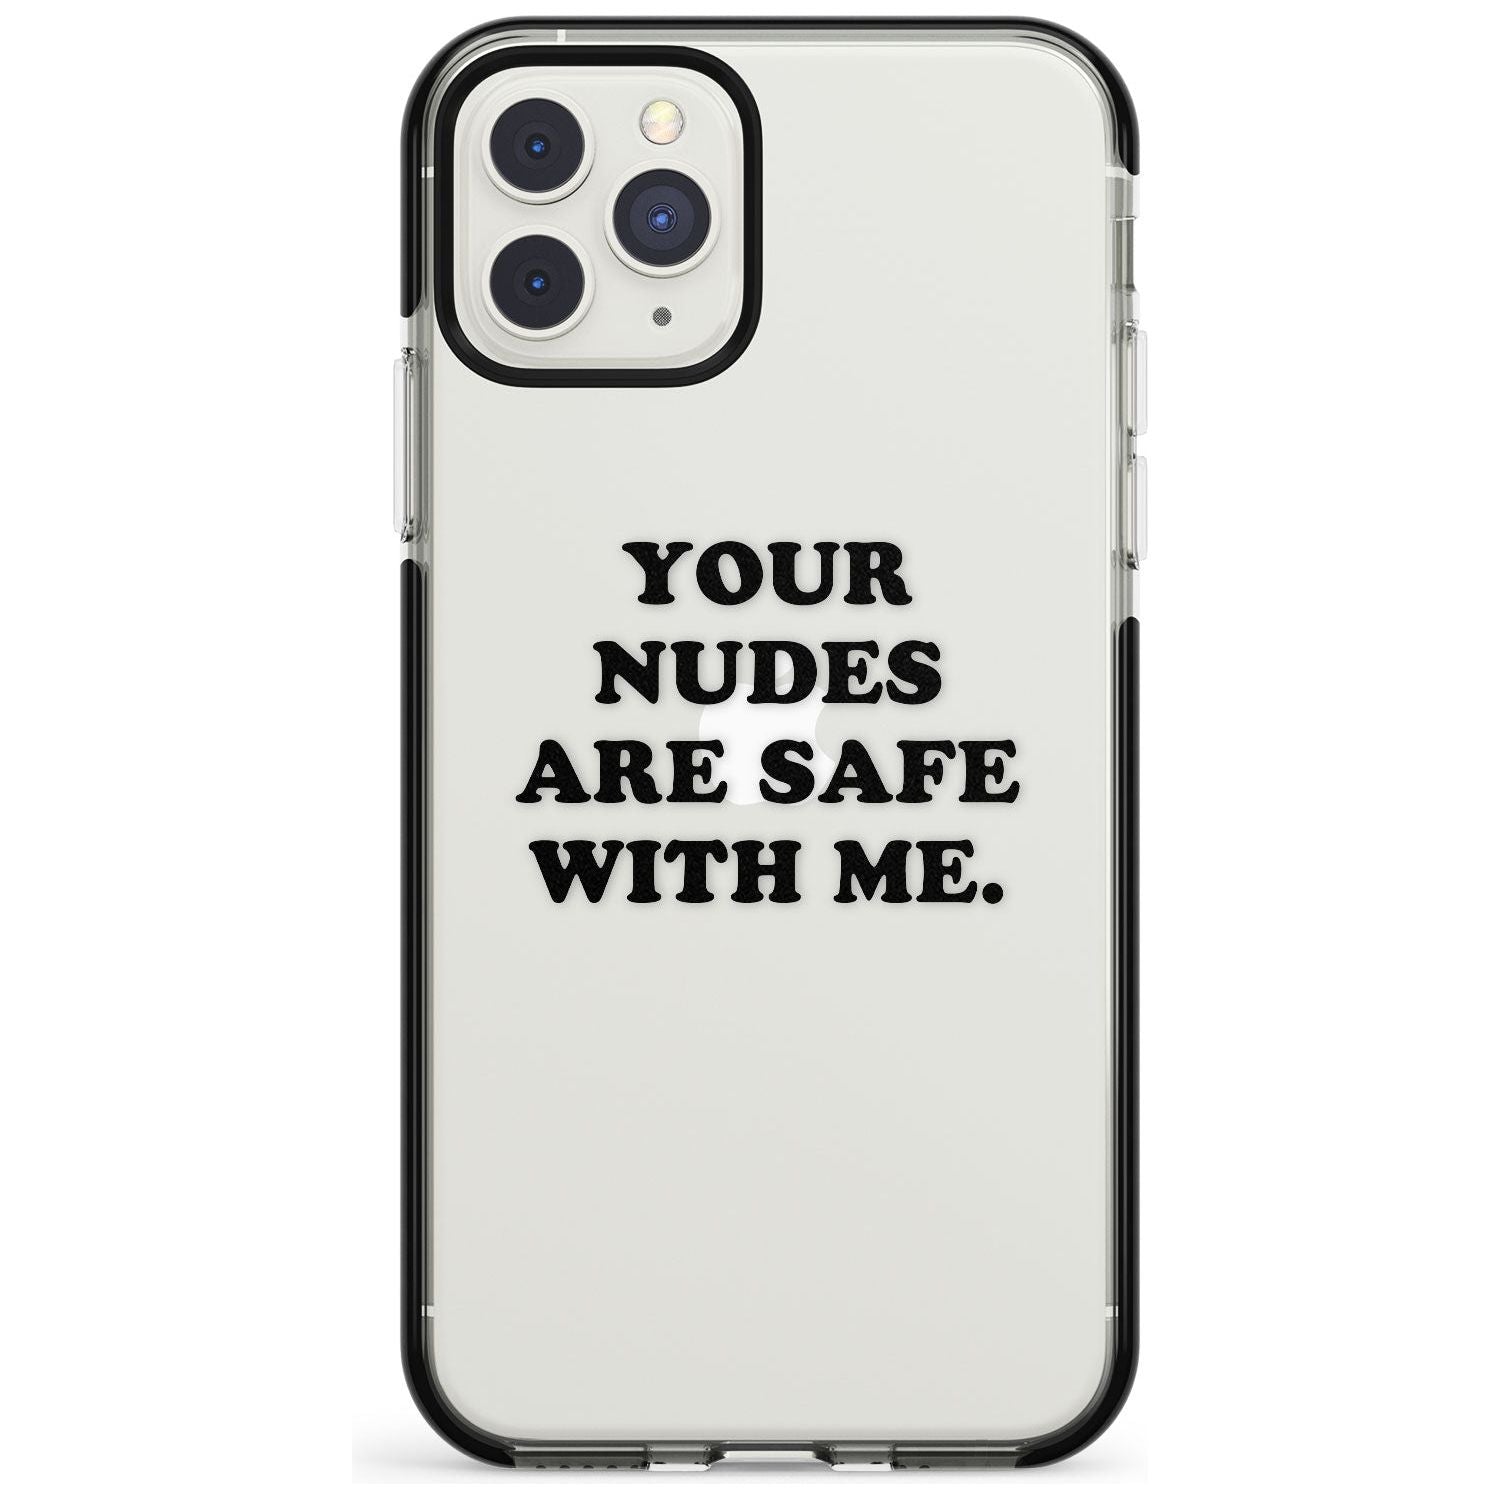 Your nudes are safe with me... BLACK Black Impact Phone Case for iPhone 11 Pro Max